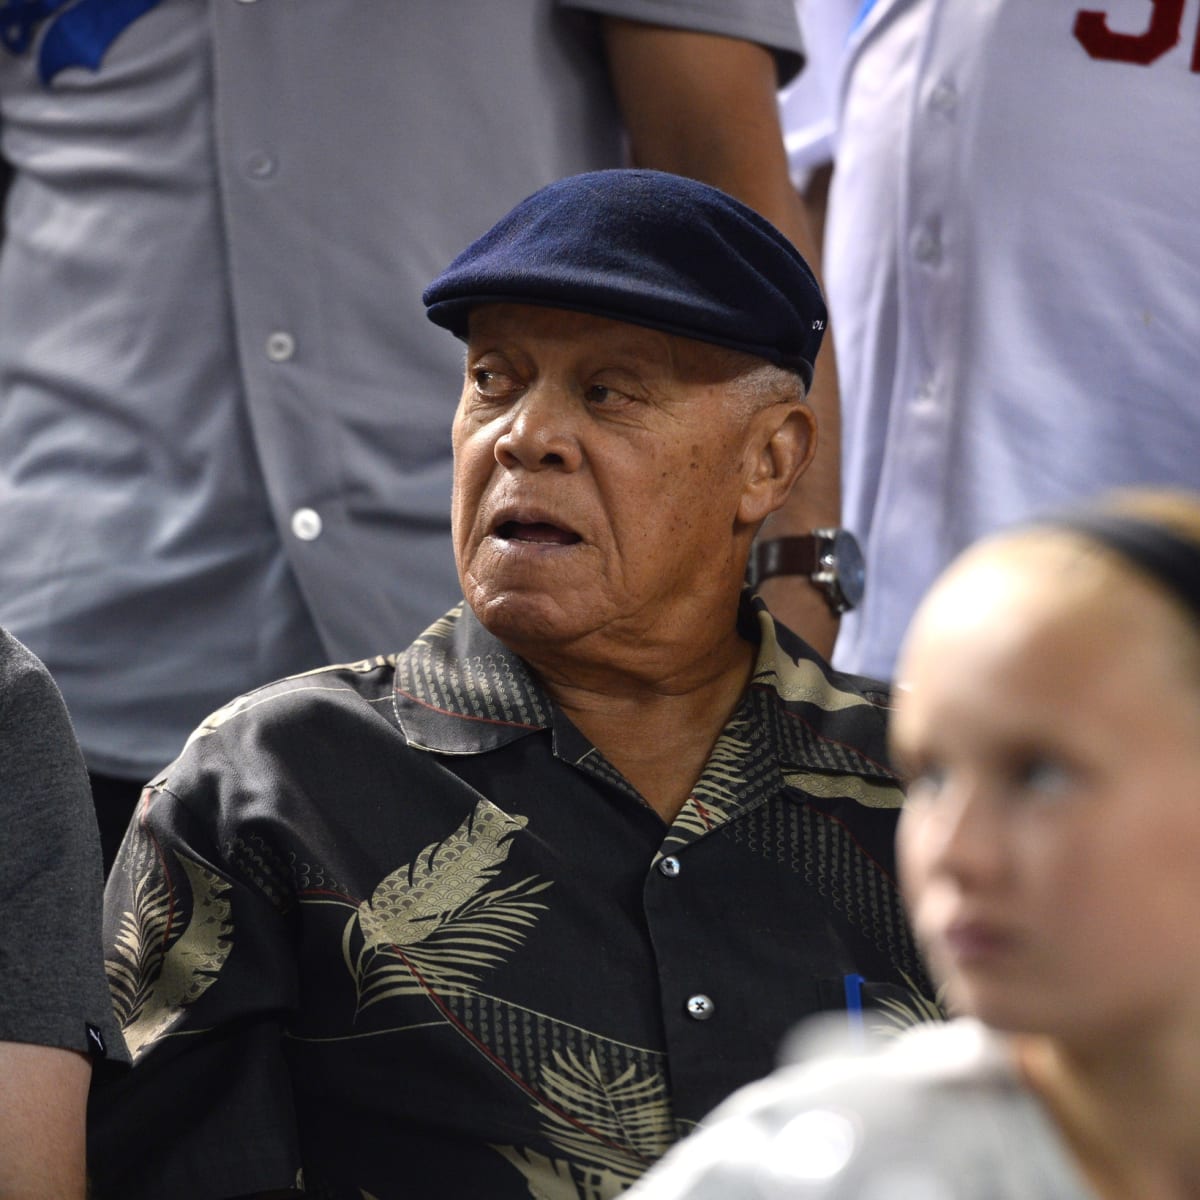 He played for the Expos? . . . Maury Wills - Cooperstowners in Canada